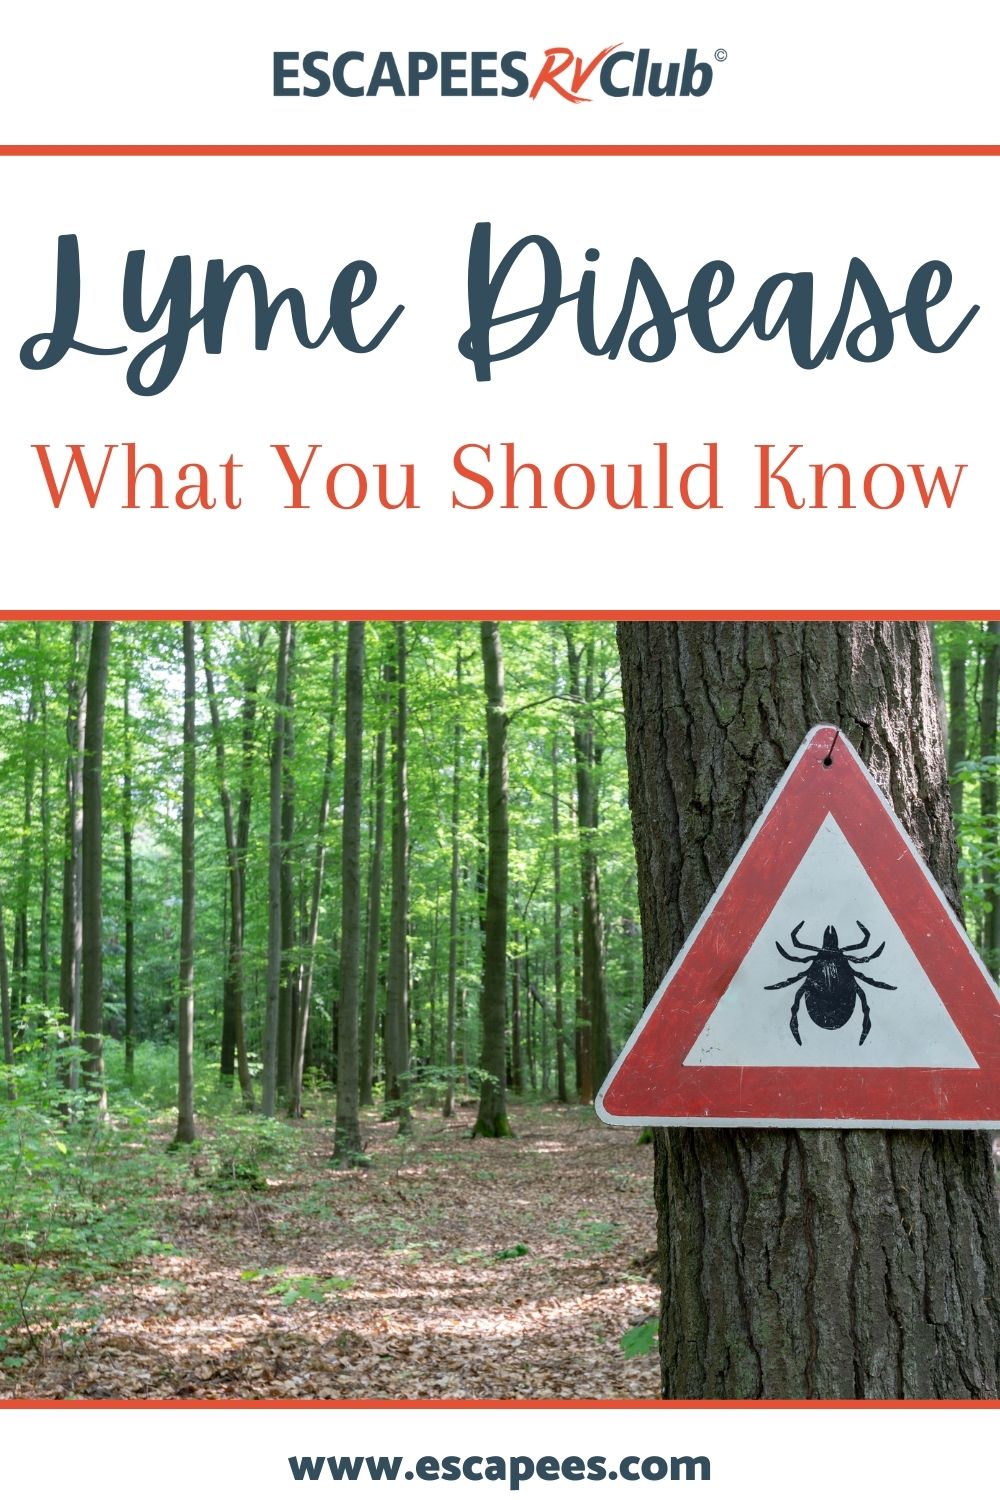 Once Bitten, Twice Shy: What You Should Know About Lyme Disease 33